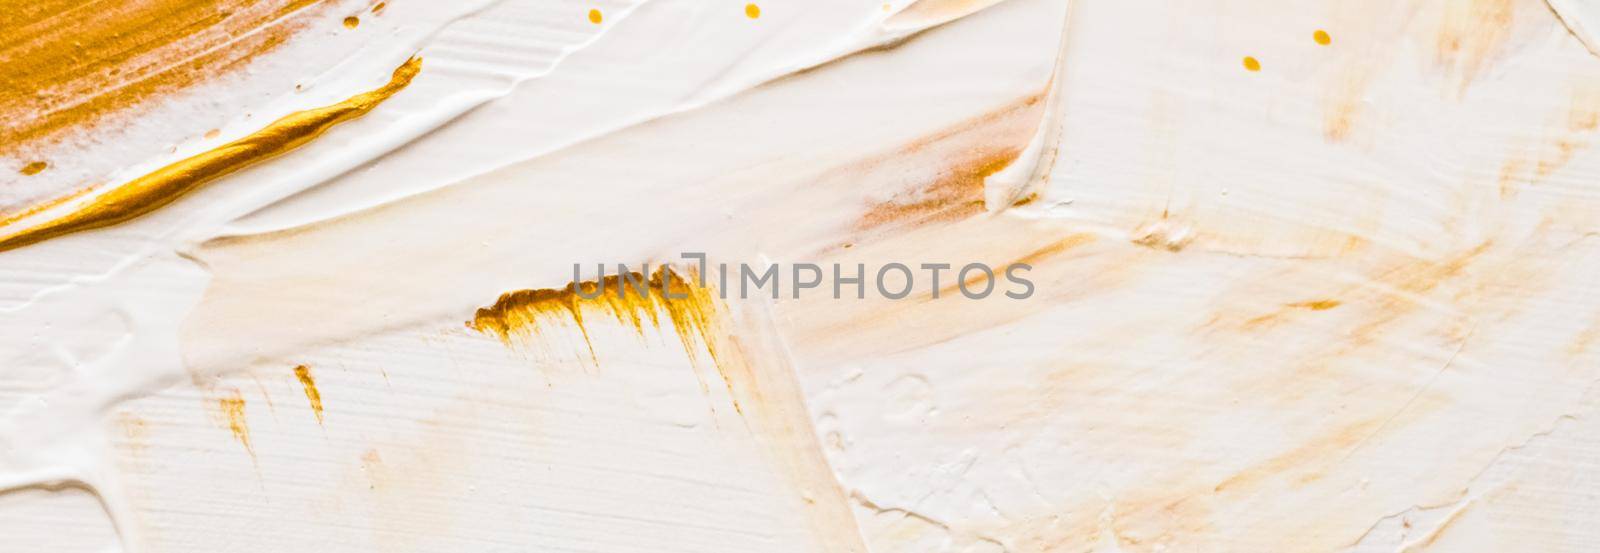 Artistic abstract texture background, golden acrylic paint brush stroke, textured ink oil splash as print backdrop for luxury holiday brand, flatlay banner design by Anneleven